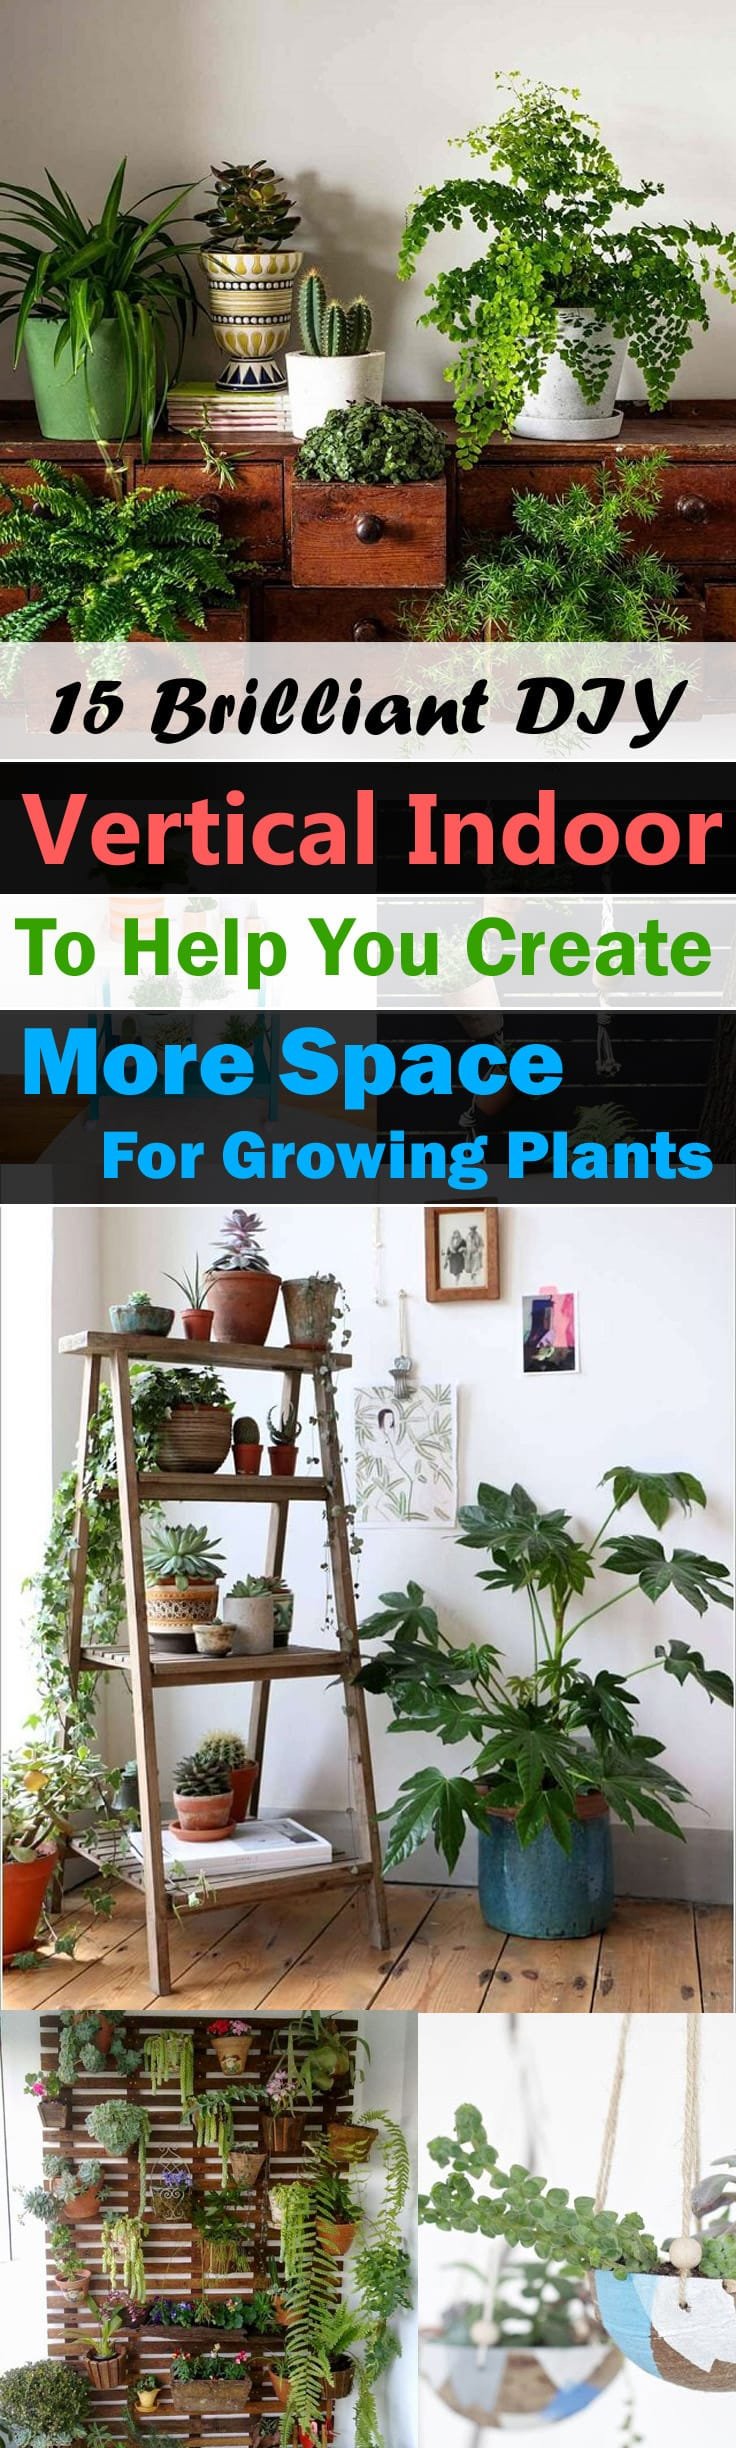 Indoor gardening can be a challenge if you're short of space. And, for your help here're the 15 Brilliant Vertical Indoor Garden Ideas, by applying a few of these you'll be able to create more space!